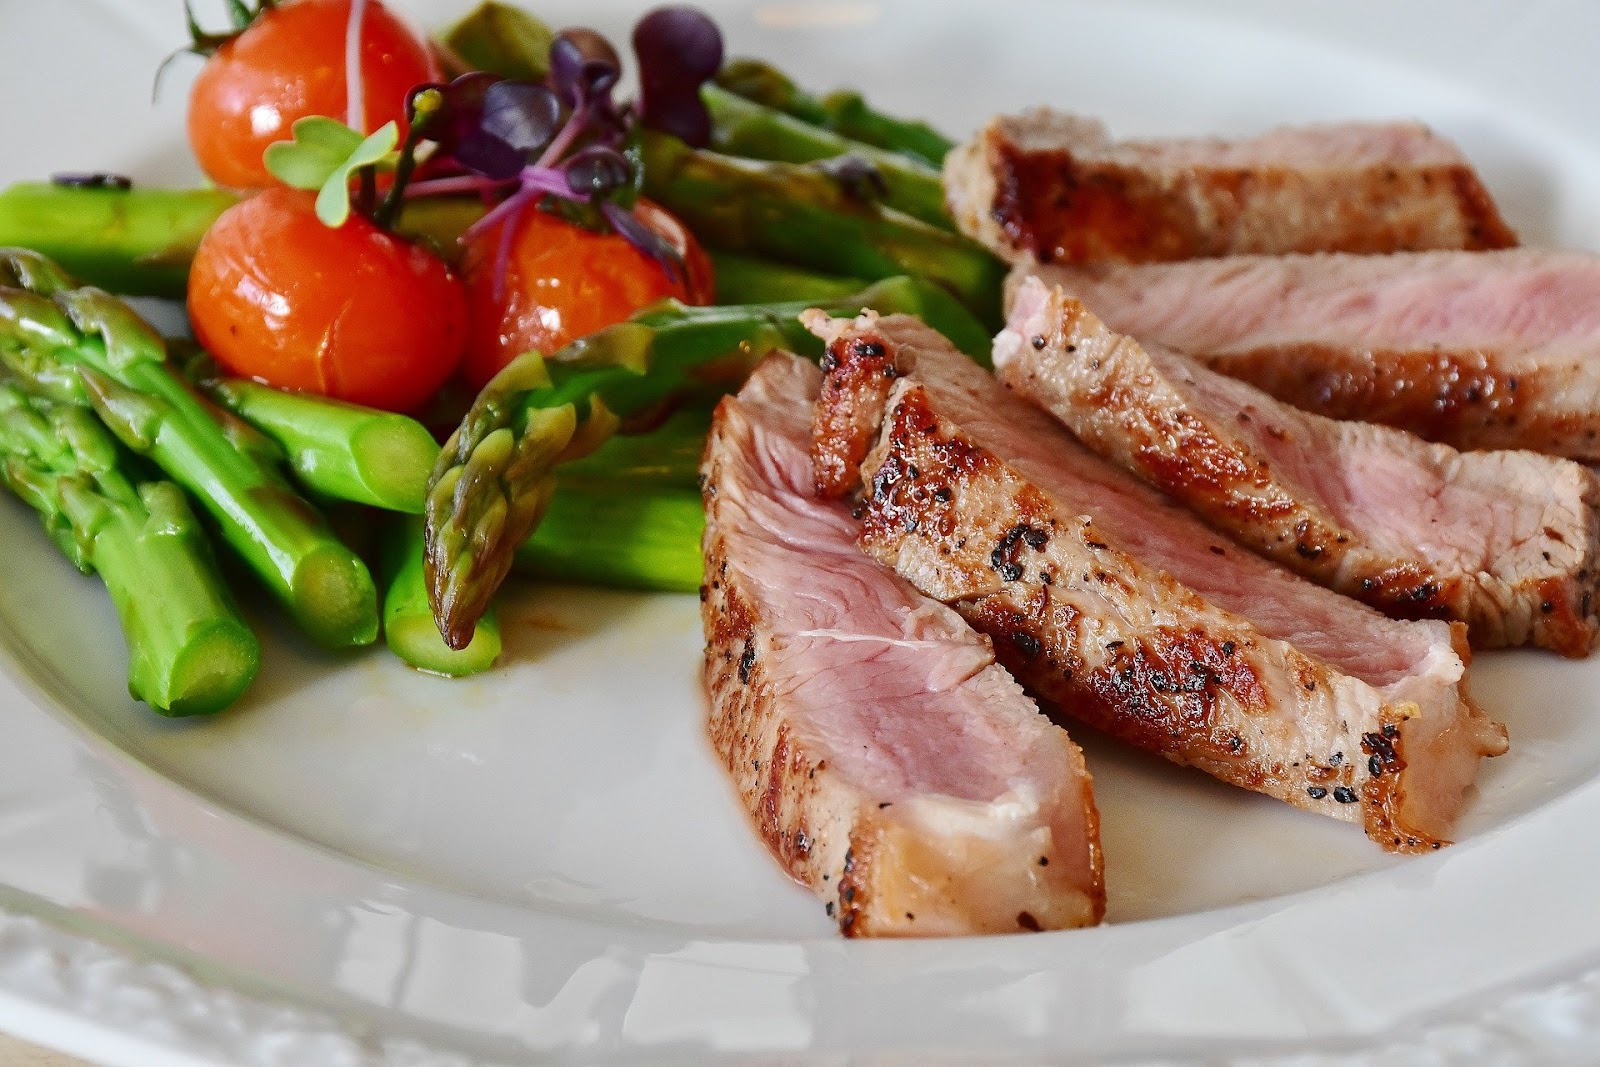 A picture of a healthy meal of pork, asparagus and cherry tomatoes.